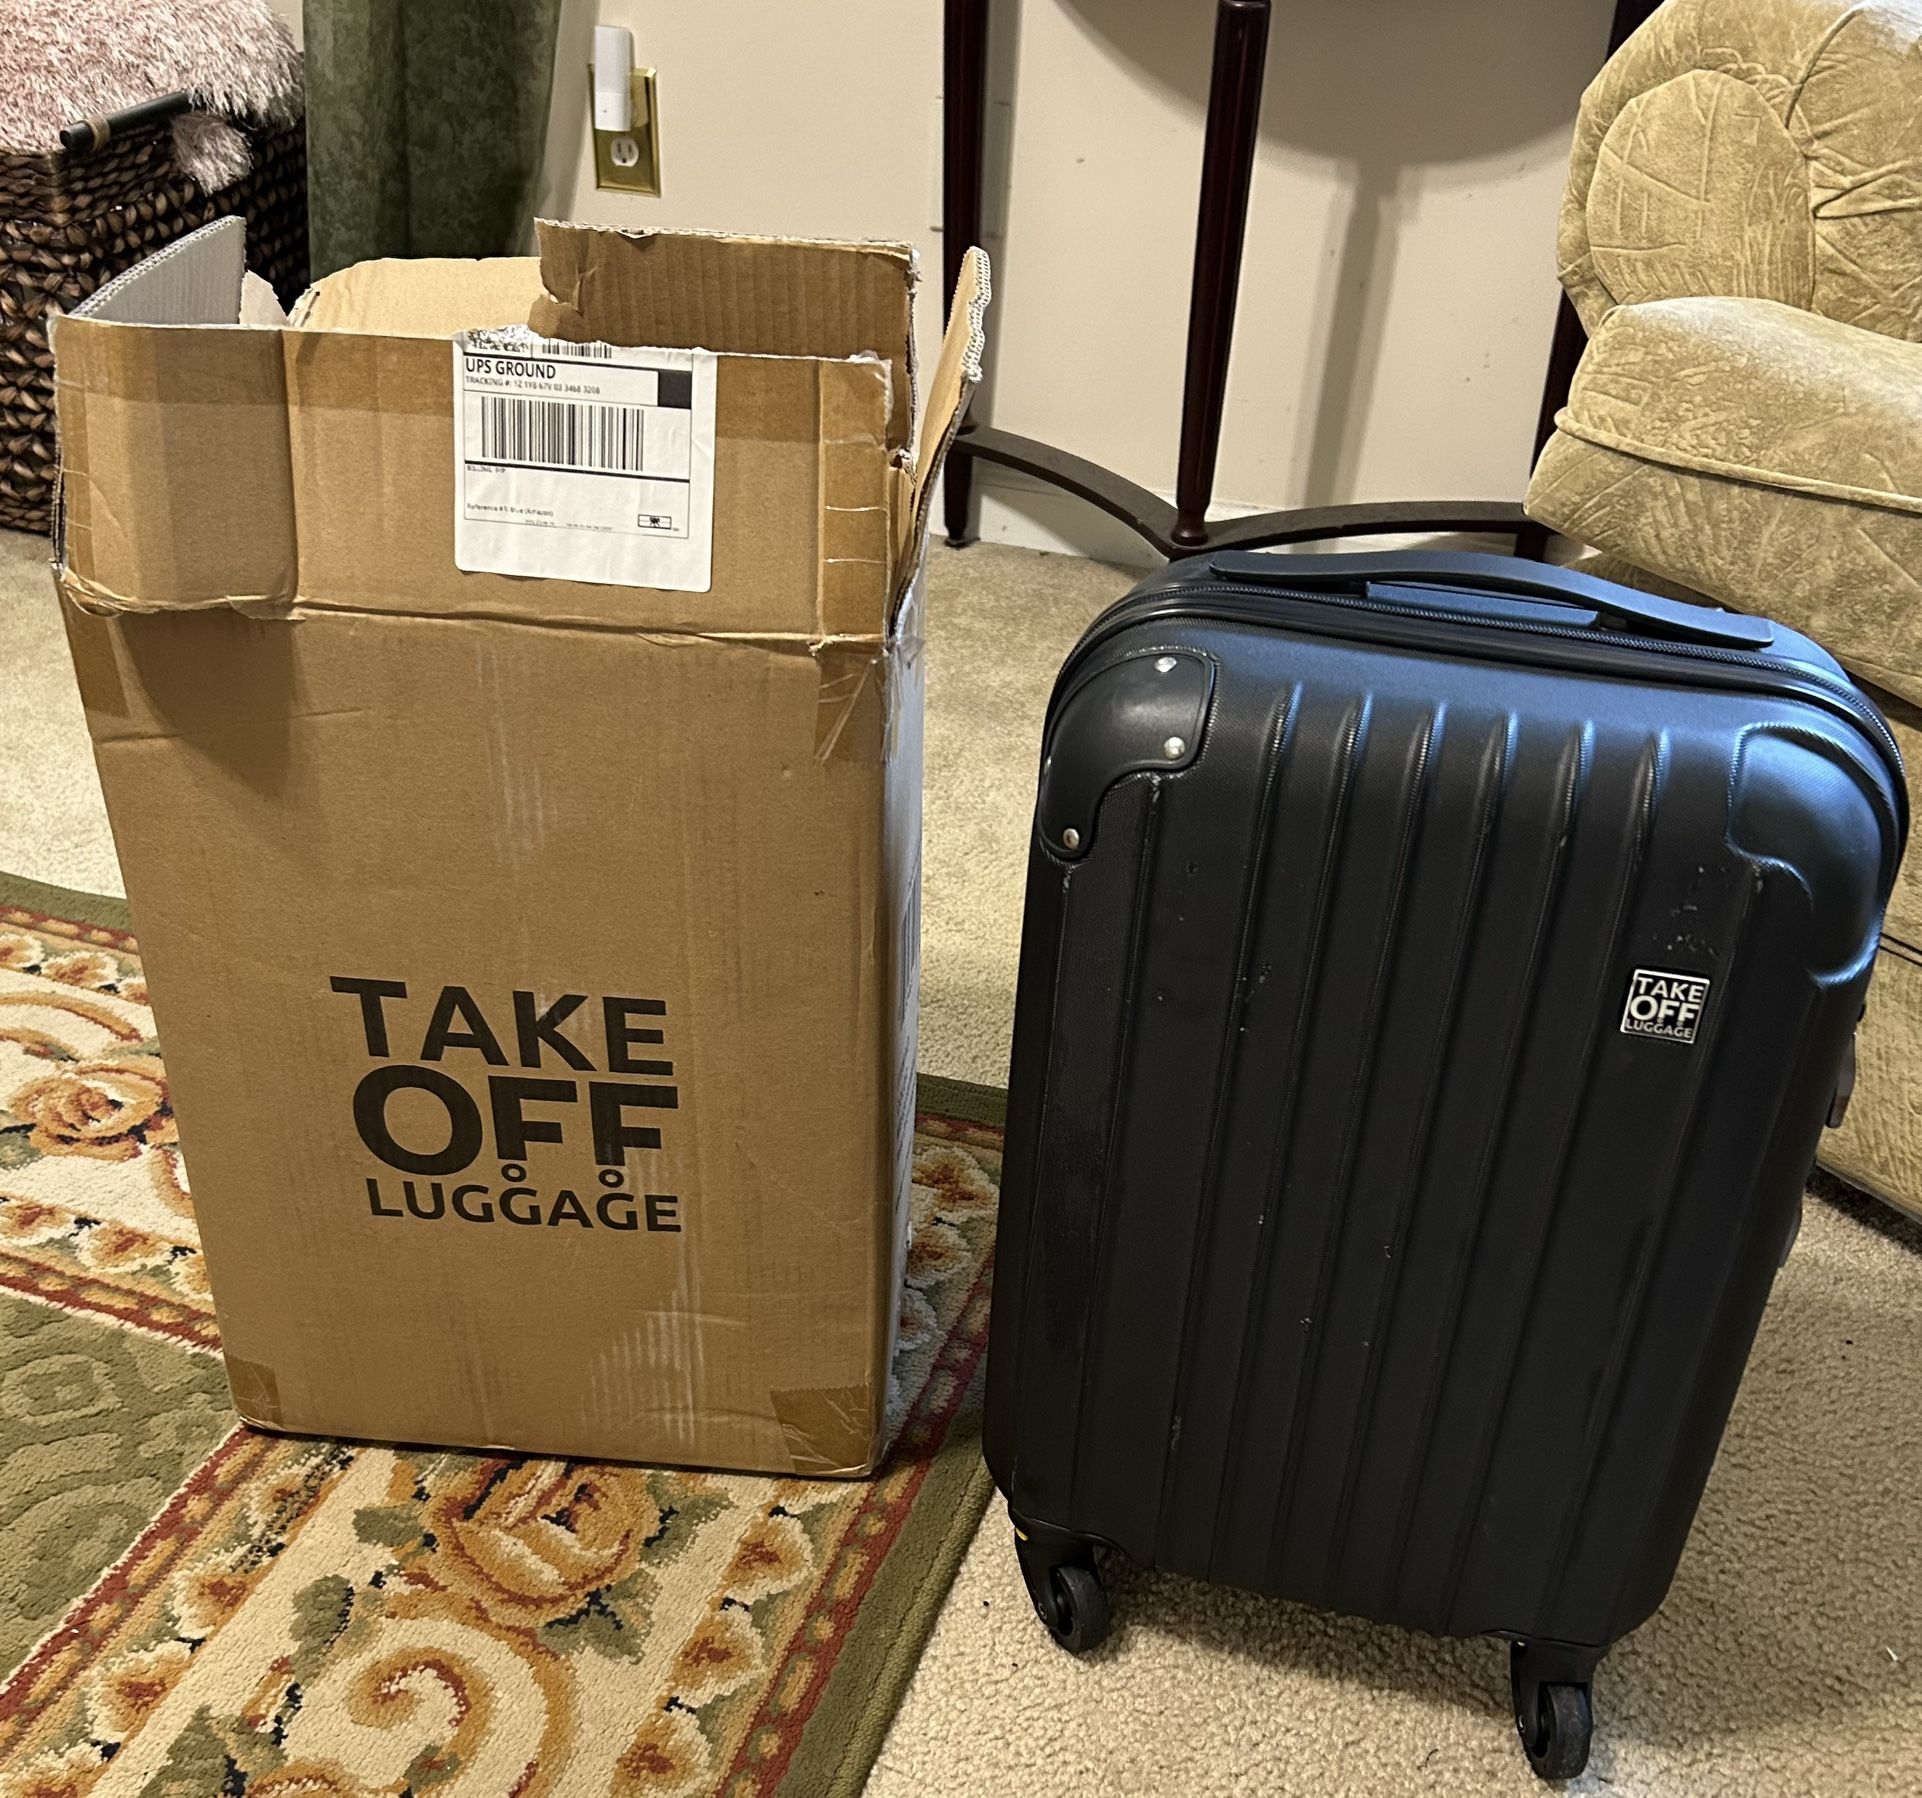 Take Off Luggage (personal sized suitcase)